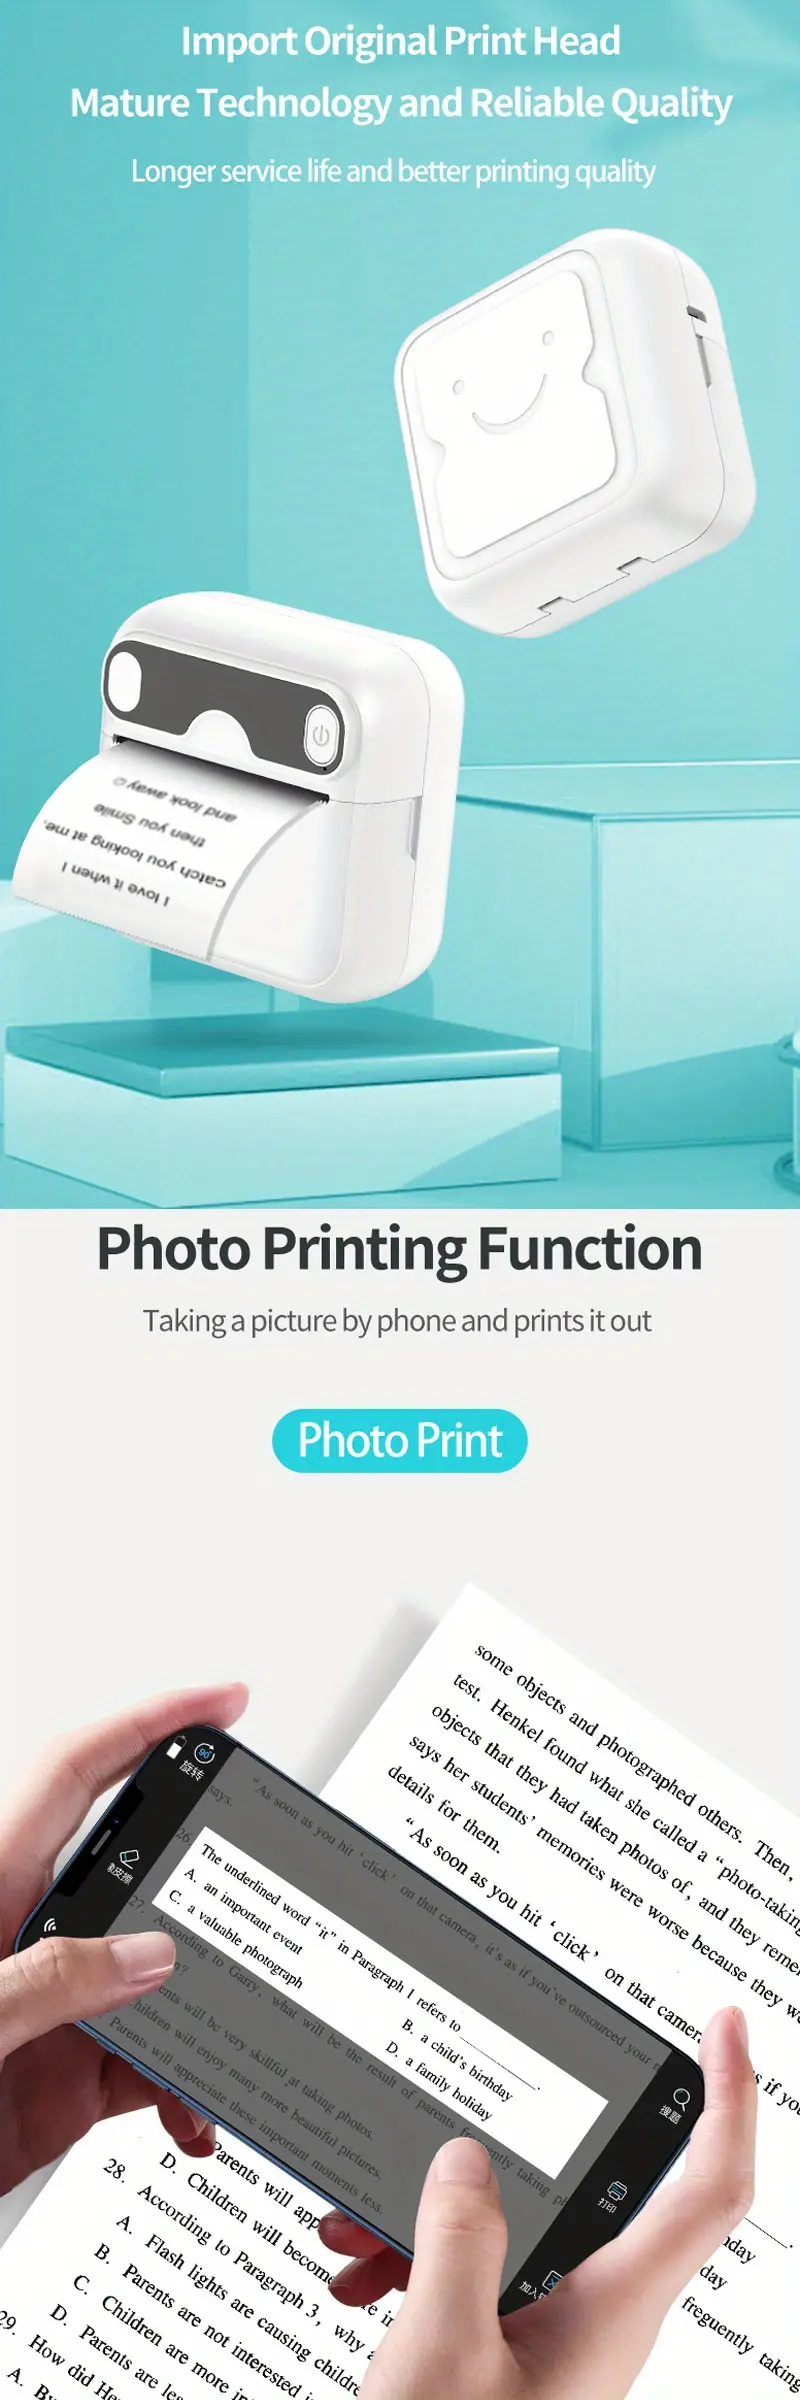 mini thermal printer print photos materials labels documents connect mobile phone wireless download app wireless mobile students office stationery send print paper instructions charging lines details 2